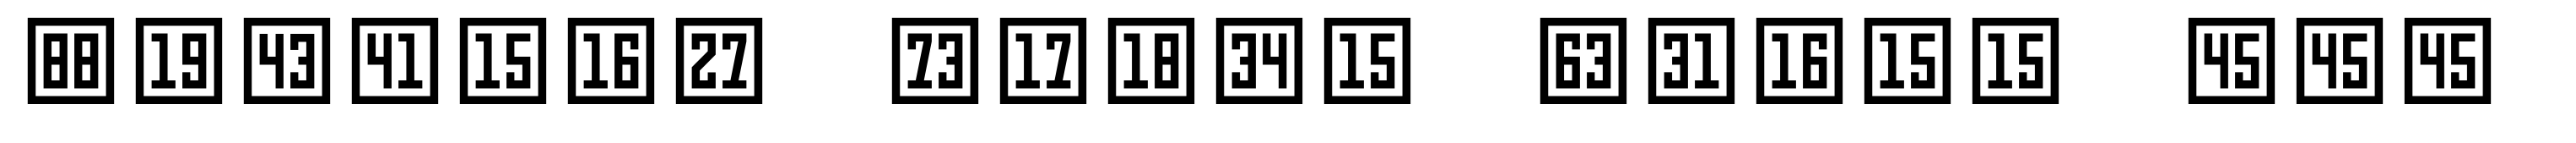 Numbers Style Three Square Positive